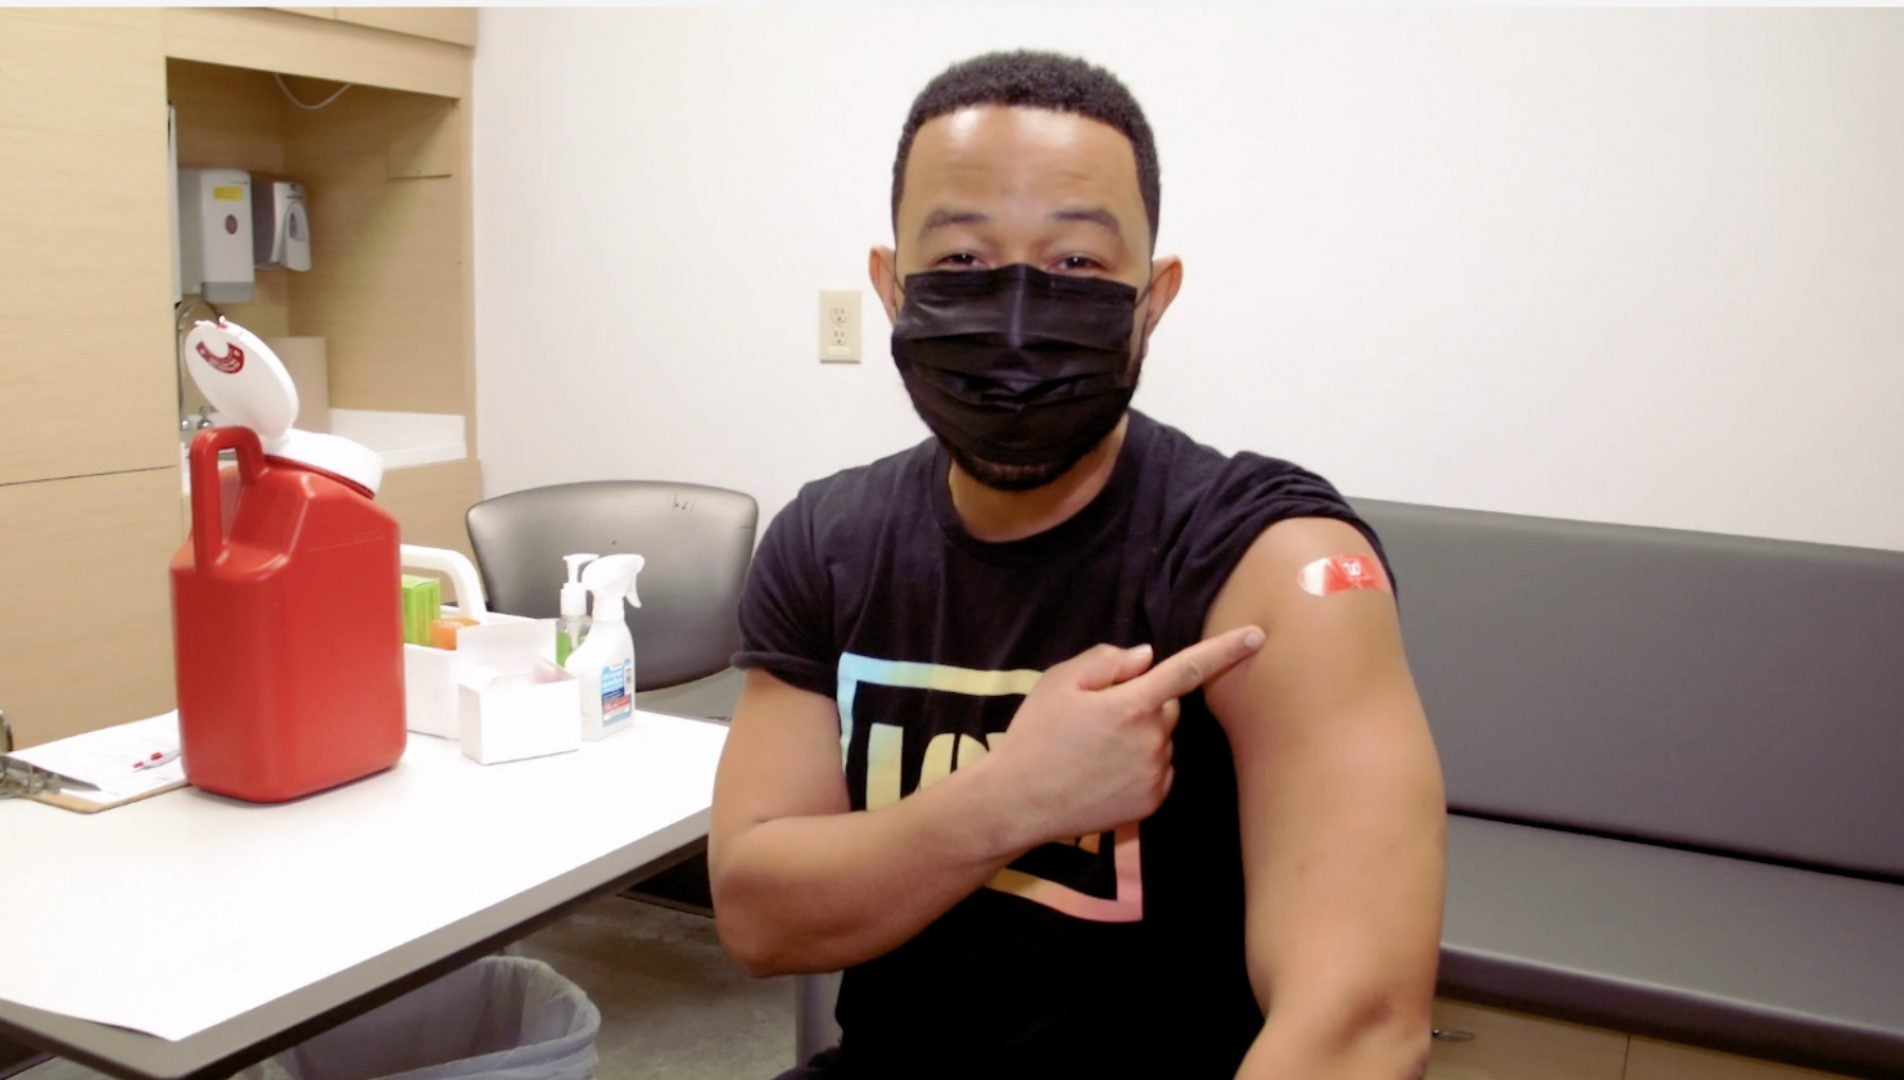 John Legend Got His COVID-19 Vaccine And Wants You To Get Yours, Too: "We Finally Have A Reason For Optimism"